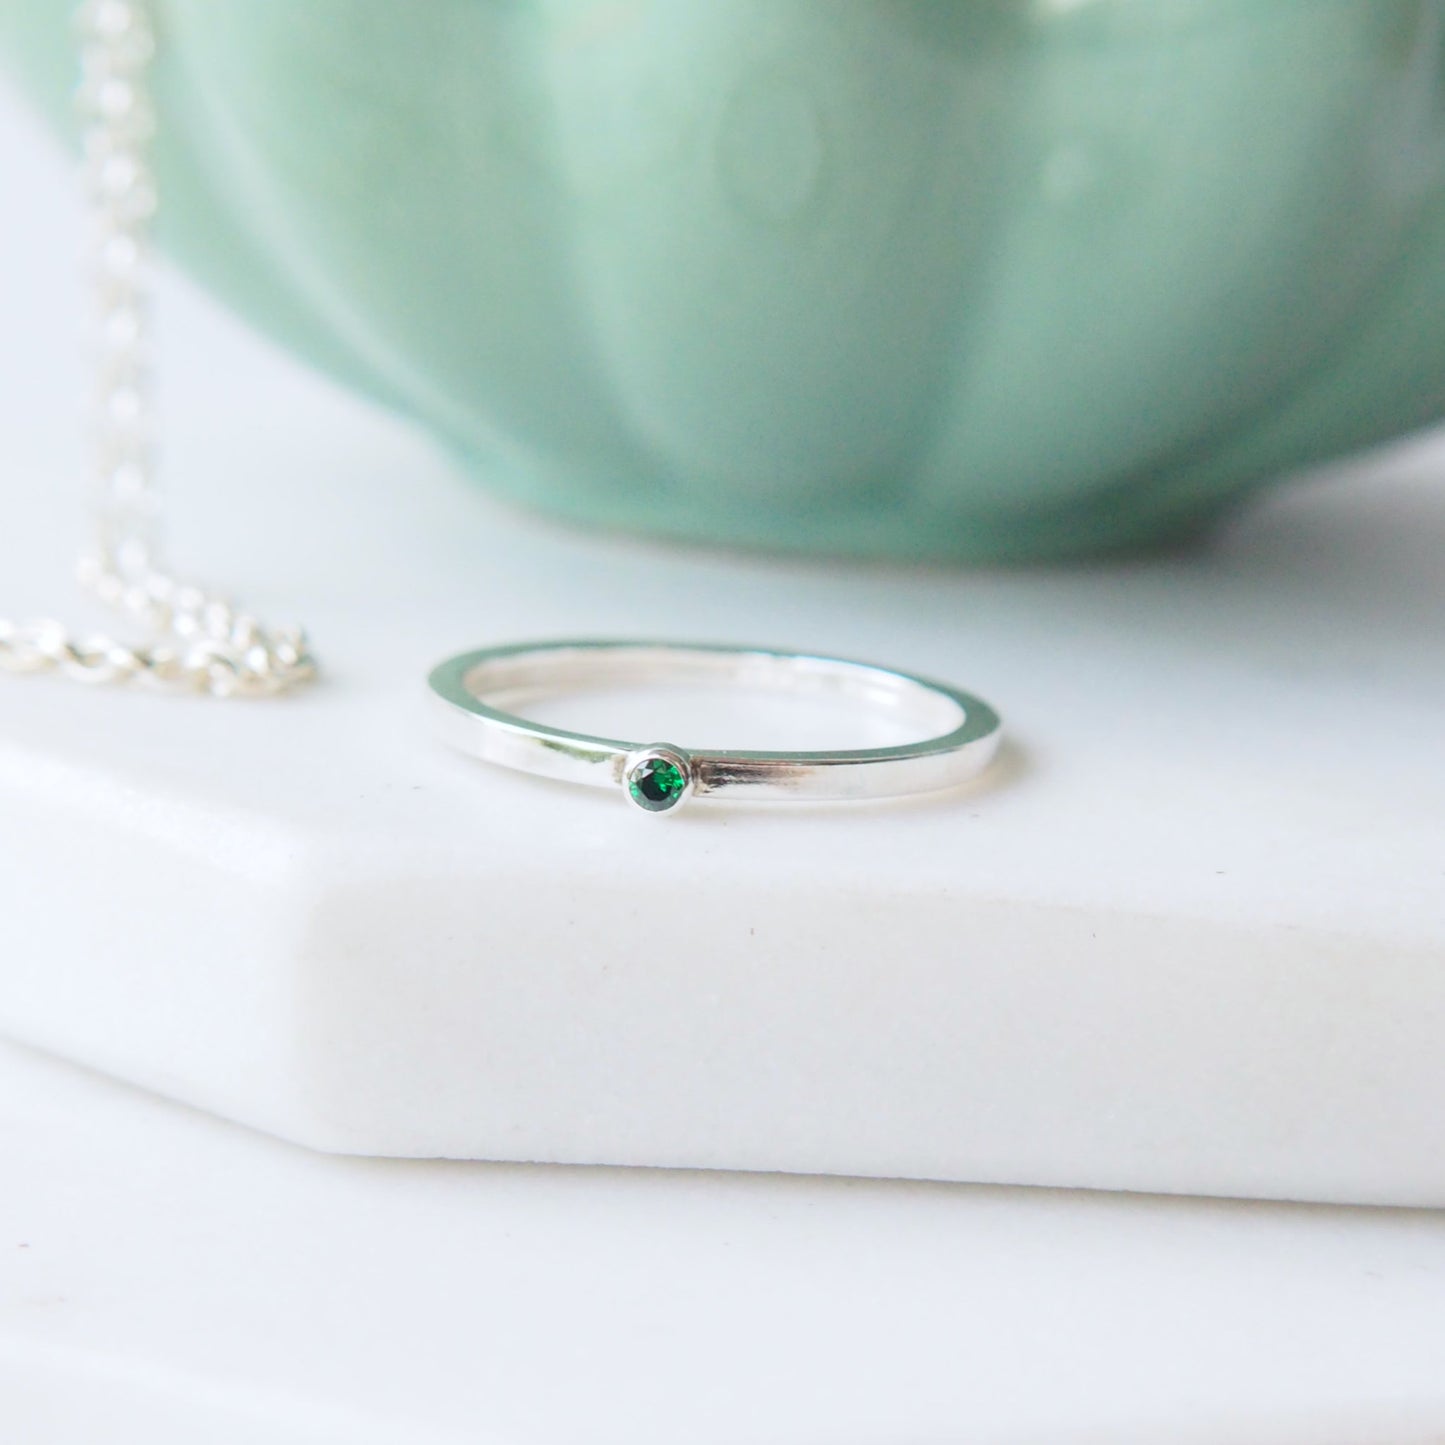 square band silver ring with a very small 2mm emerald cubic zirconia. Handmade by maram jewellery. shown on a white marble slab with a green jewellery bowl in the background